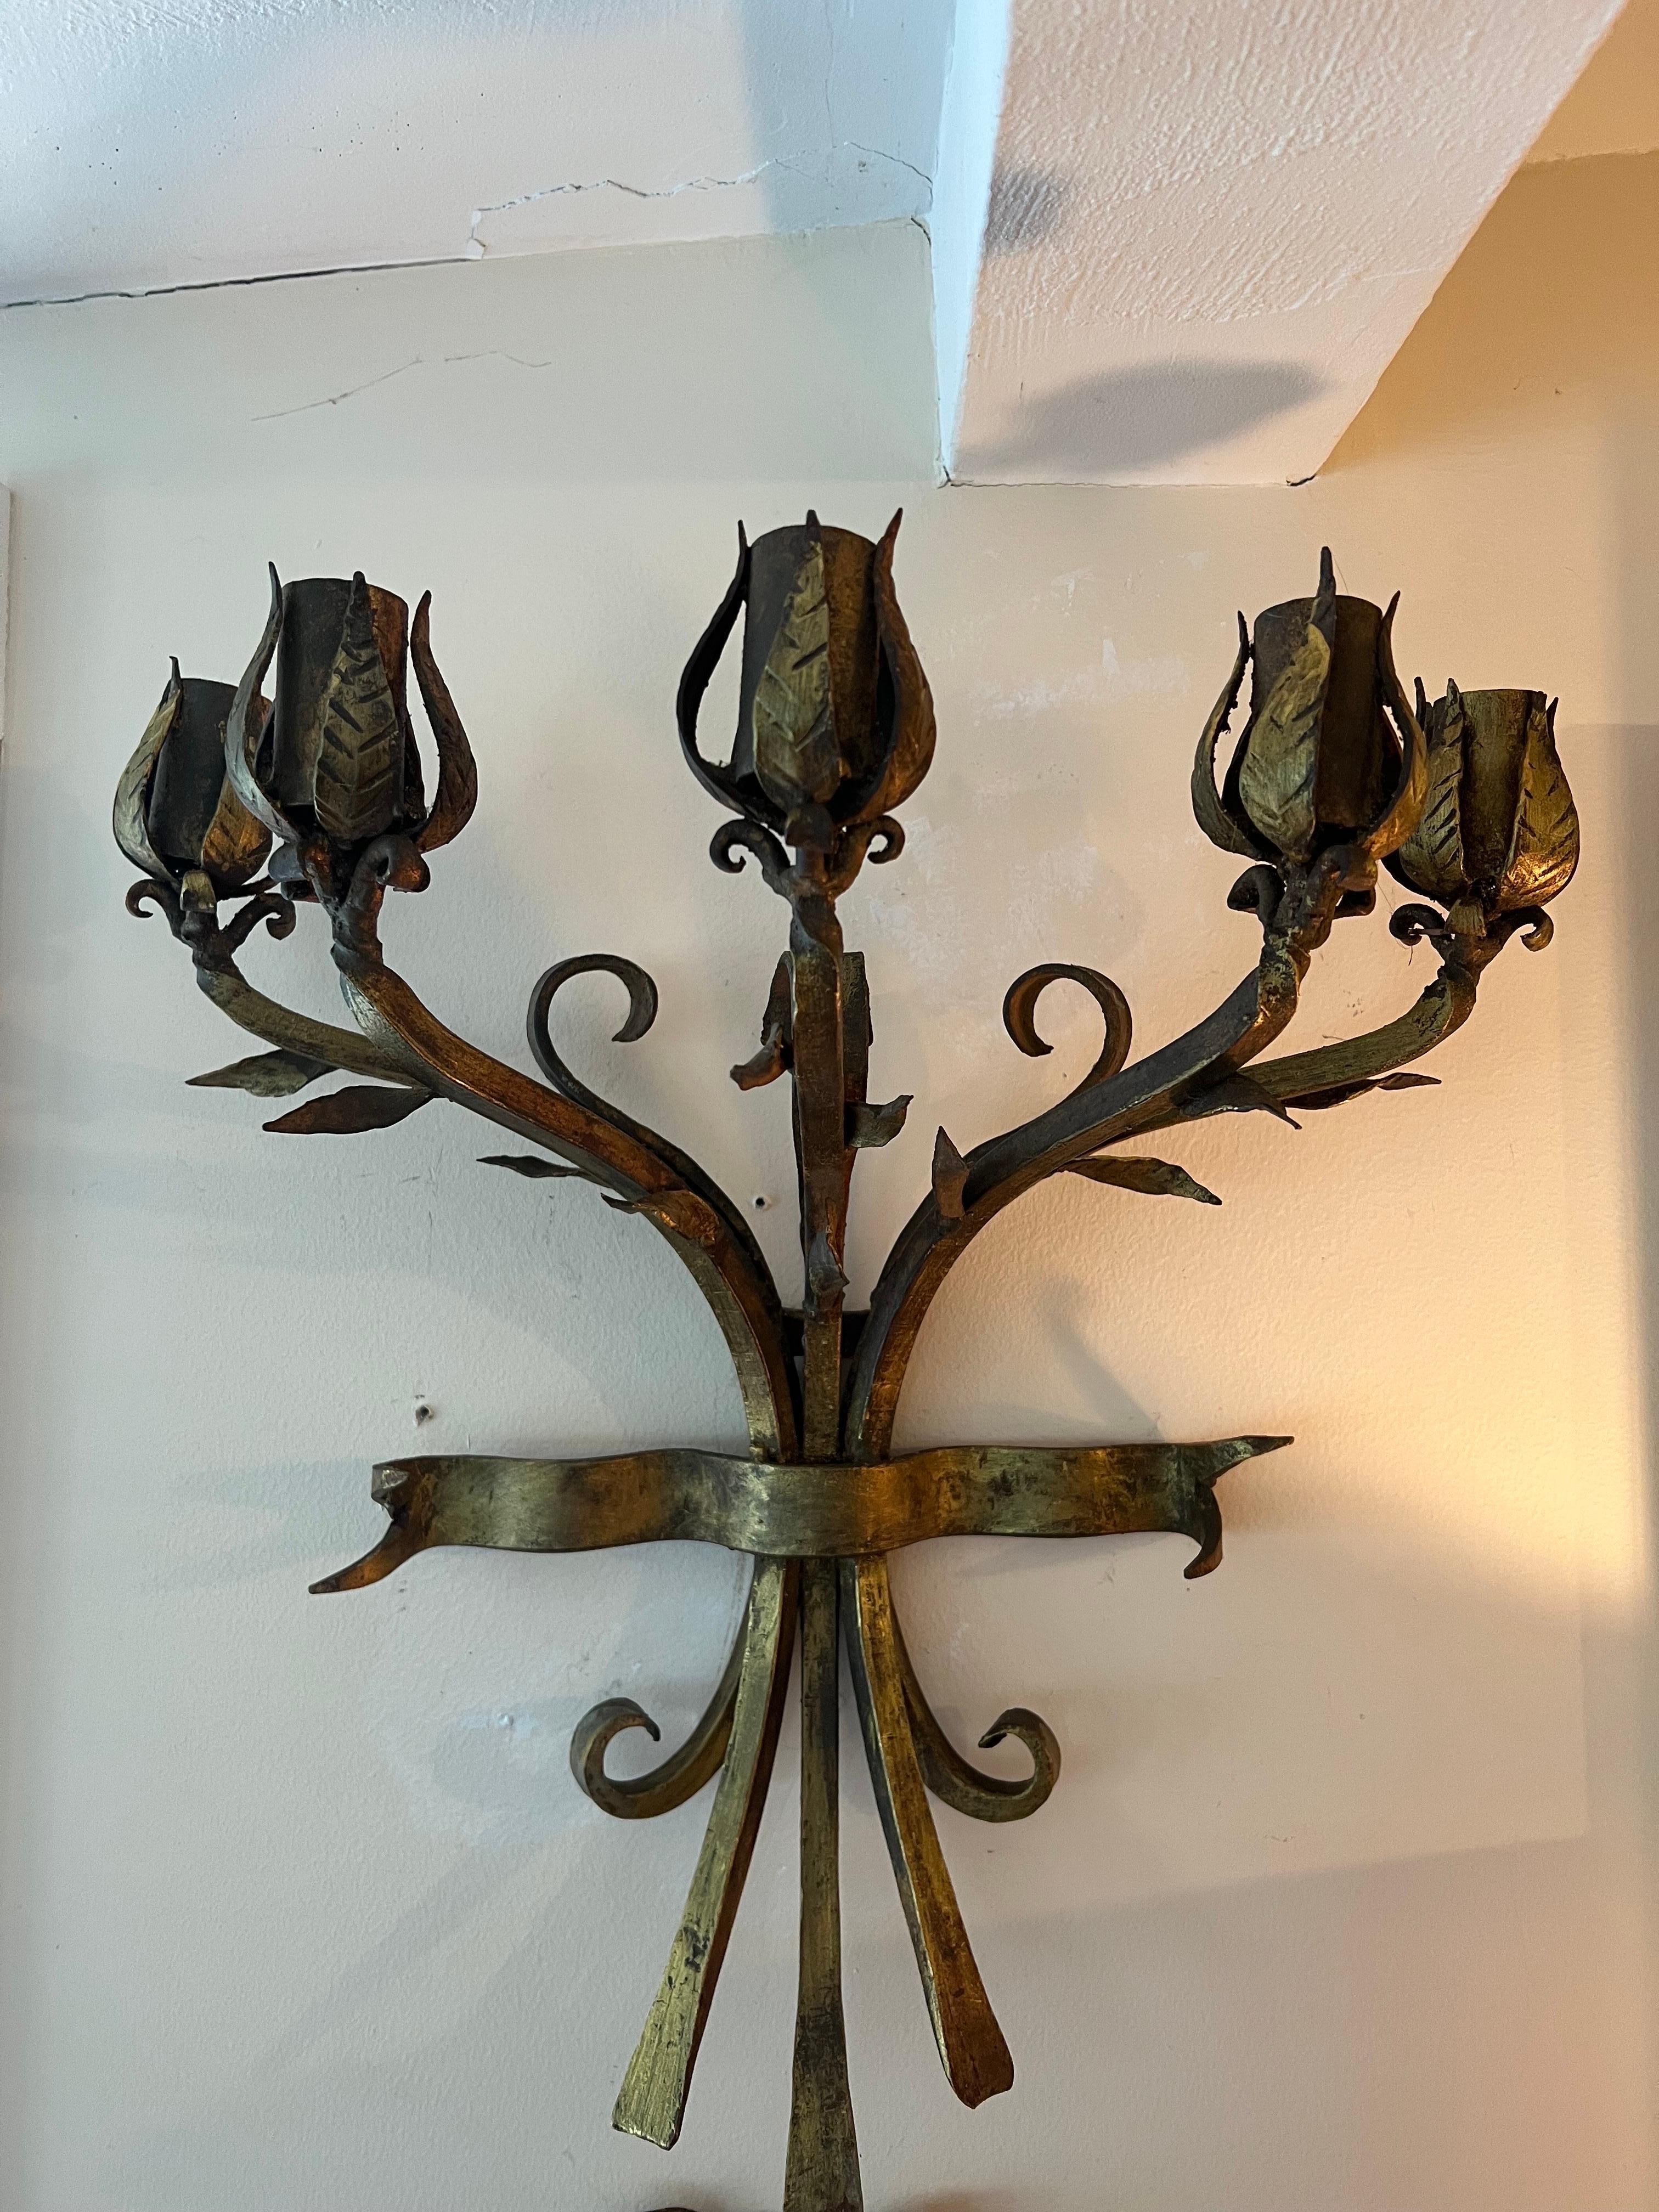 Gilt Iron Bronze Floral Wall Candleholder. Very heavy solid consruction. Gorgeous piece to add romance to a room. Also could be electrified. 5 total candle holders.